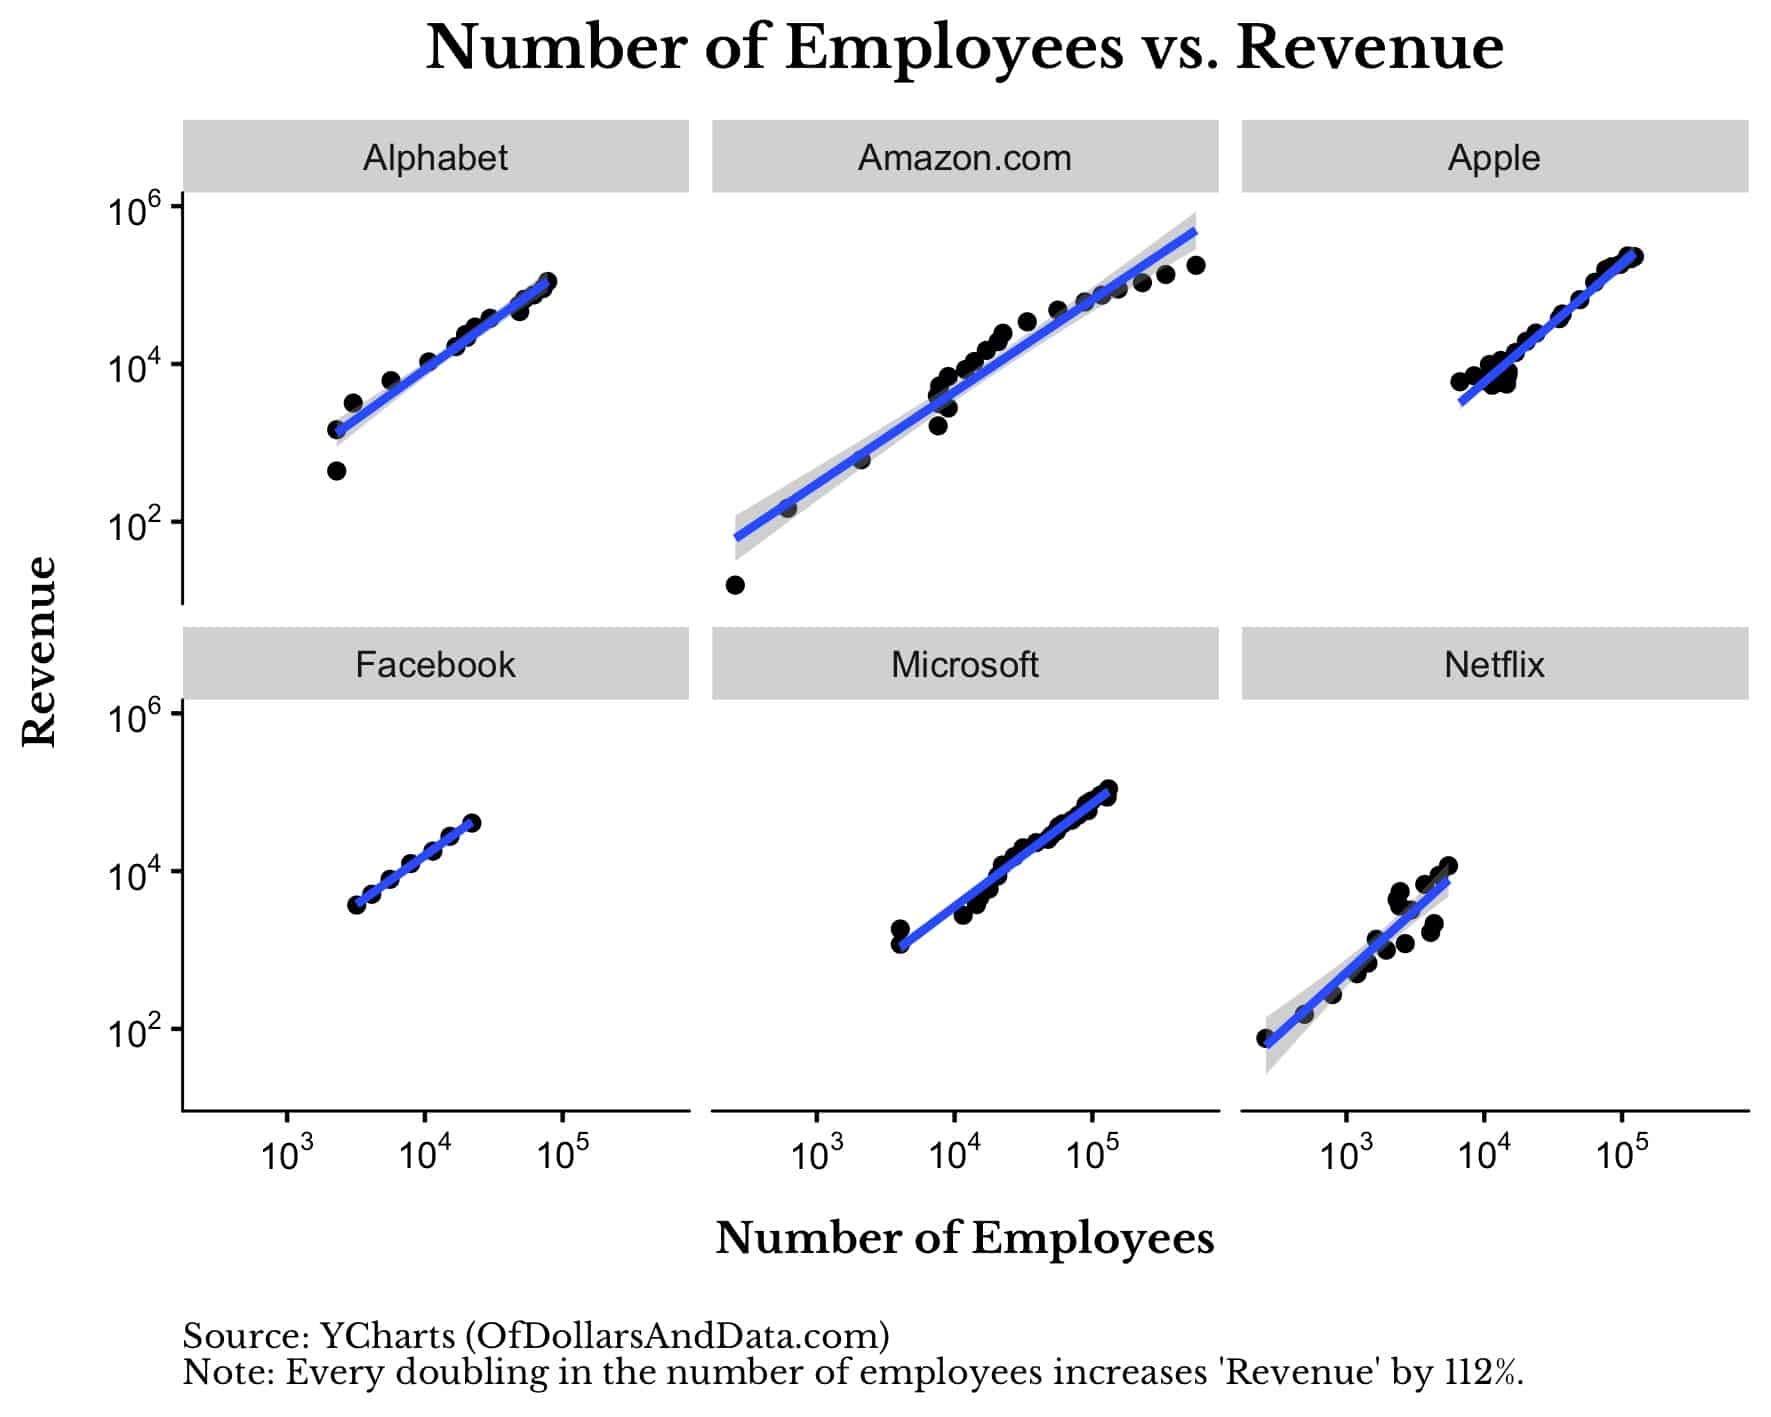 Number of employees vs revenue broken out by FAANG company.